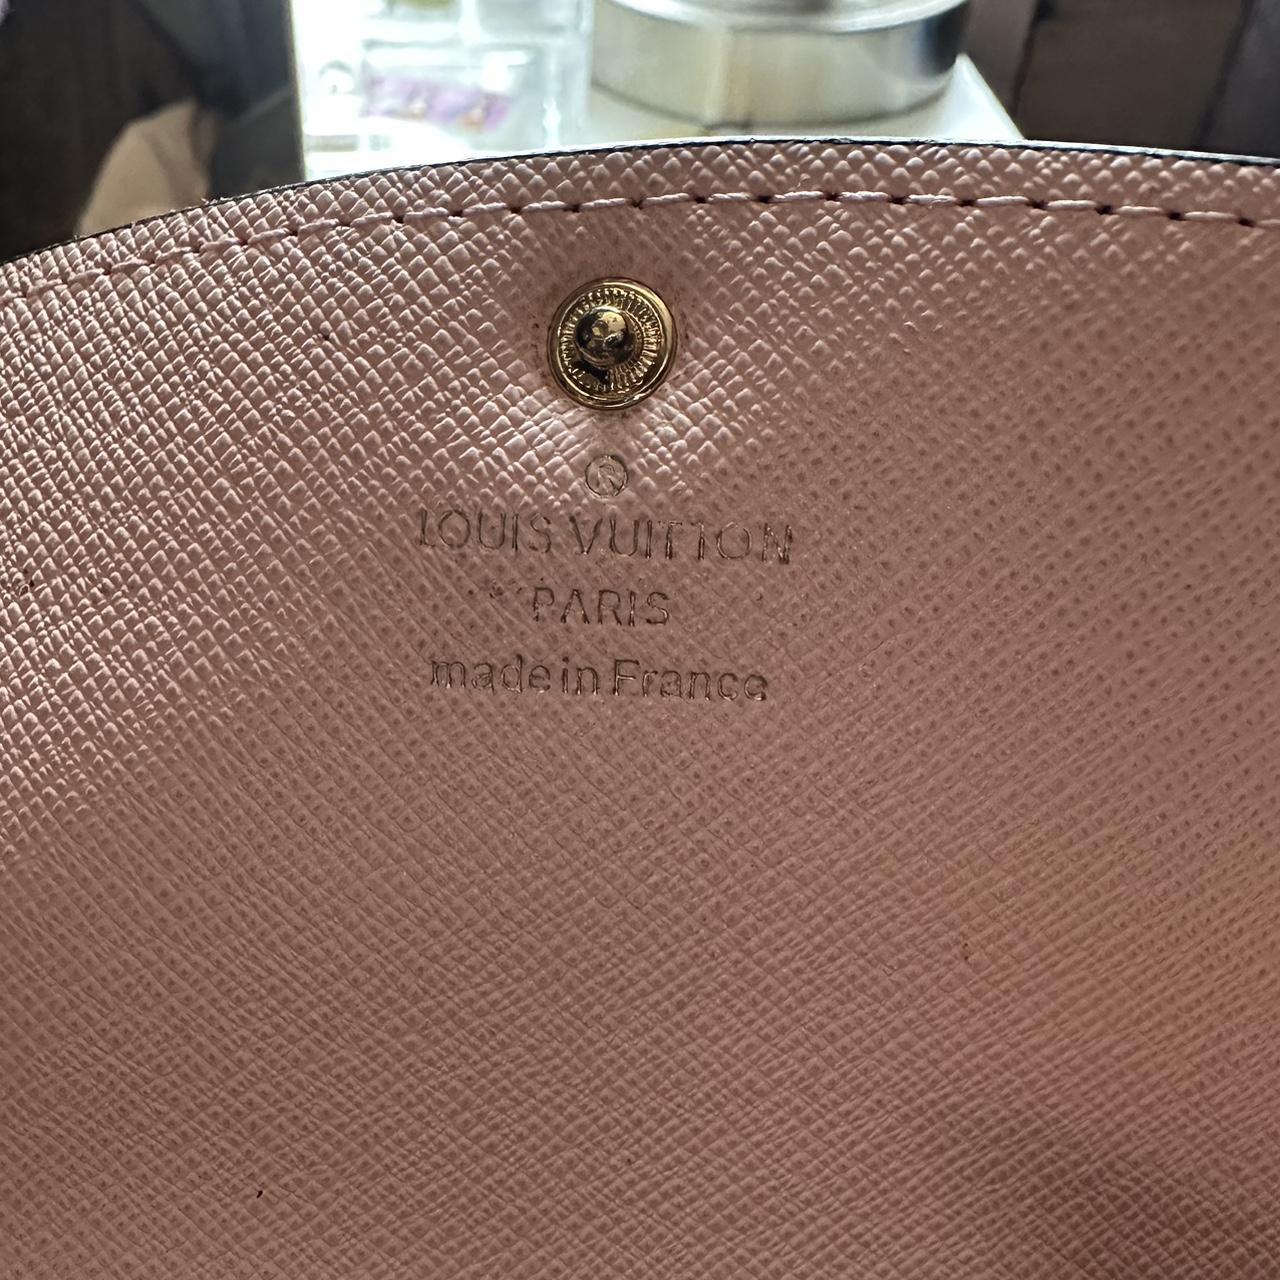 Hello I'm selling louis vuitton wallet never used - Depop